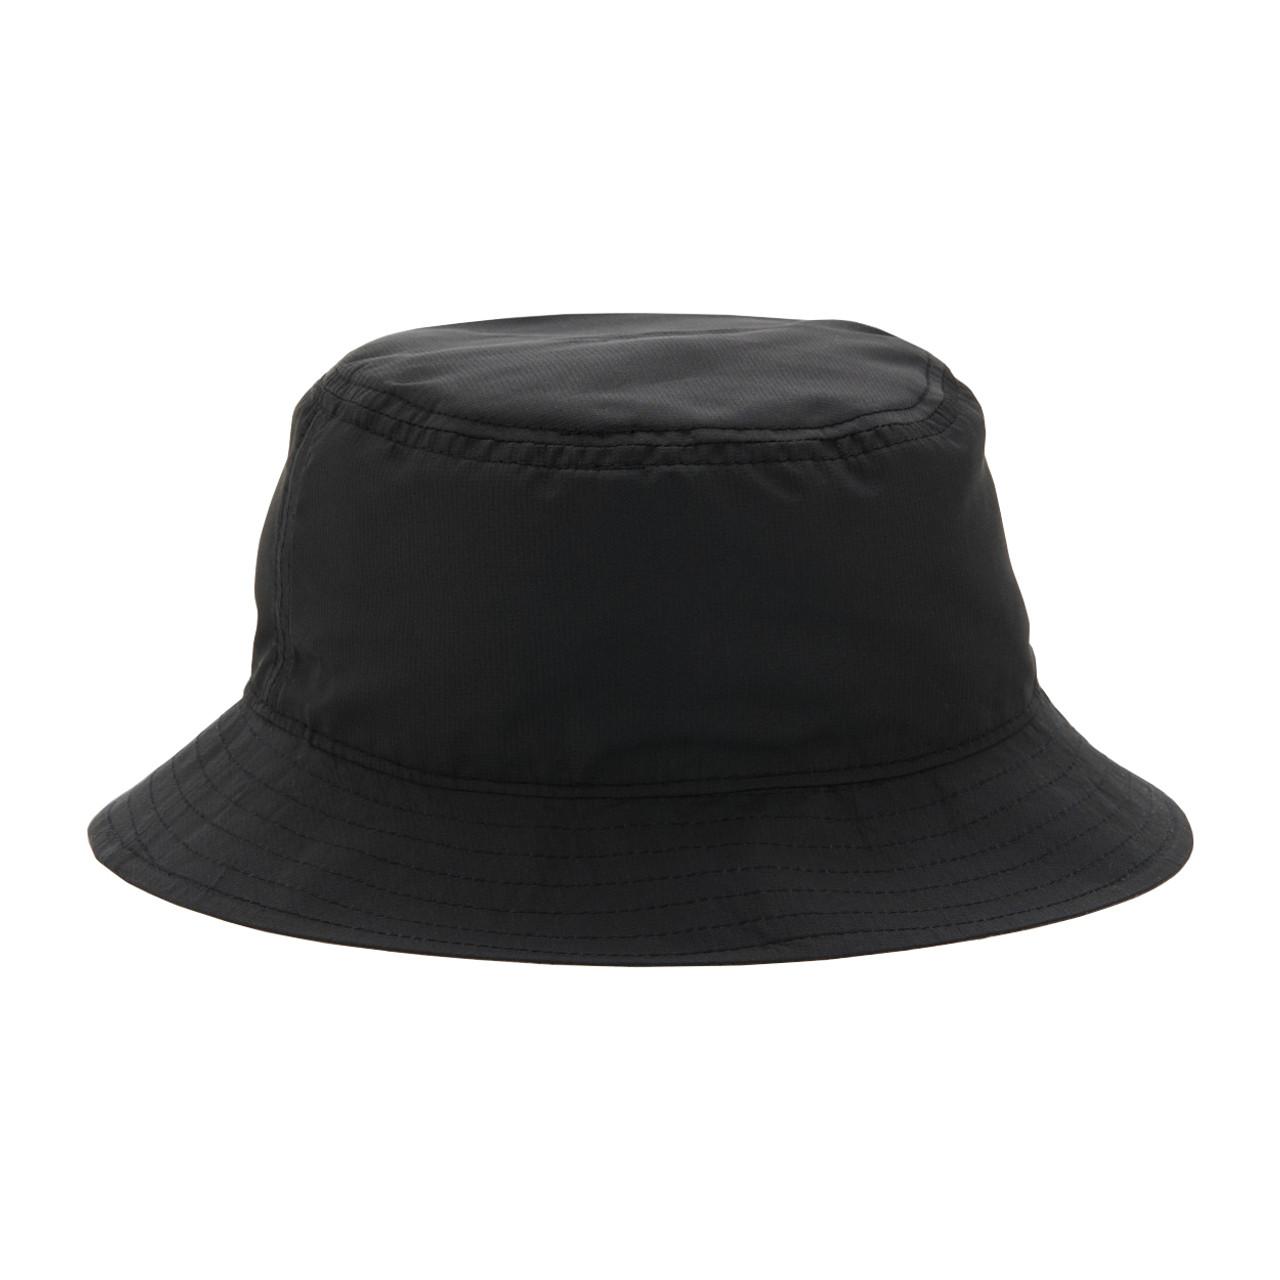 PGA Tour Reversible Bucket Hat - OSFM Fits Up To 7.5 Hat Size ...